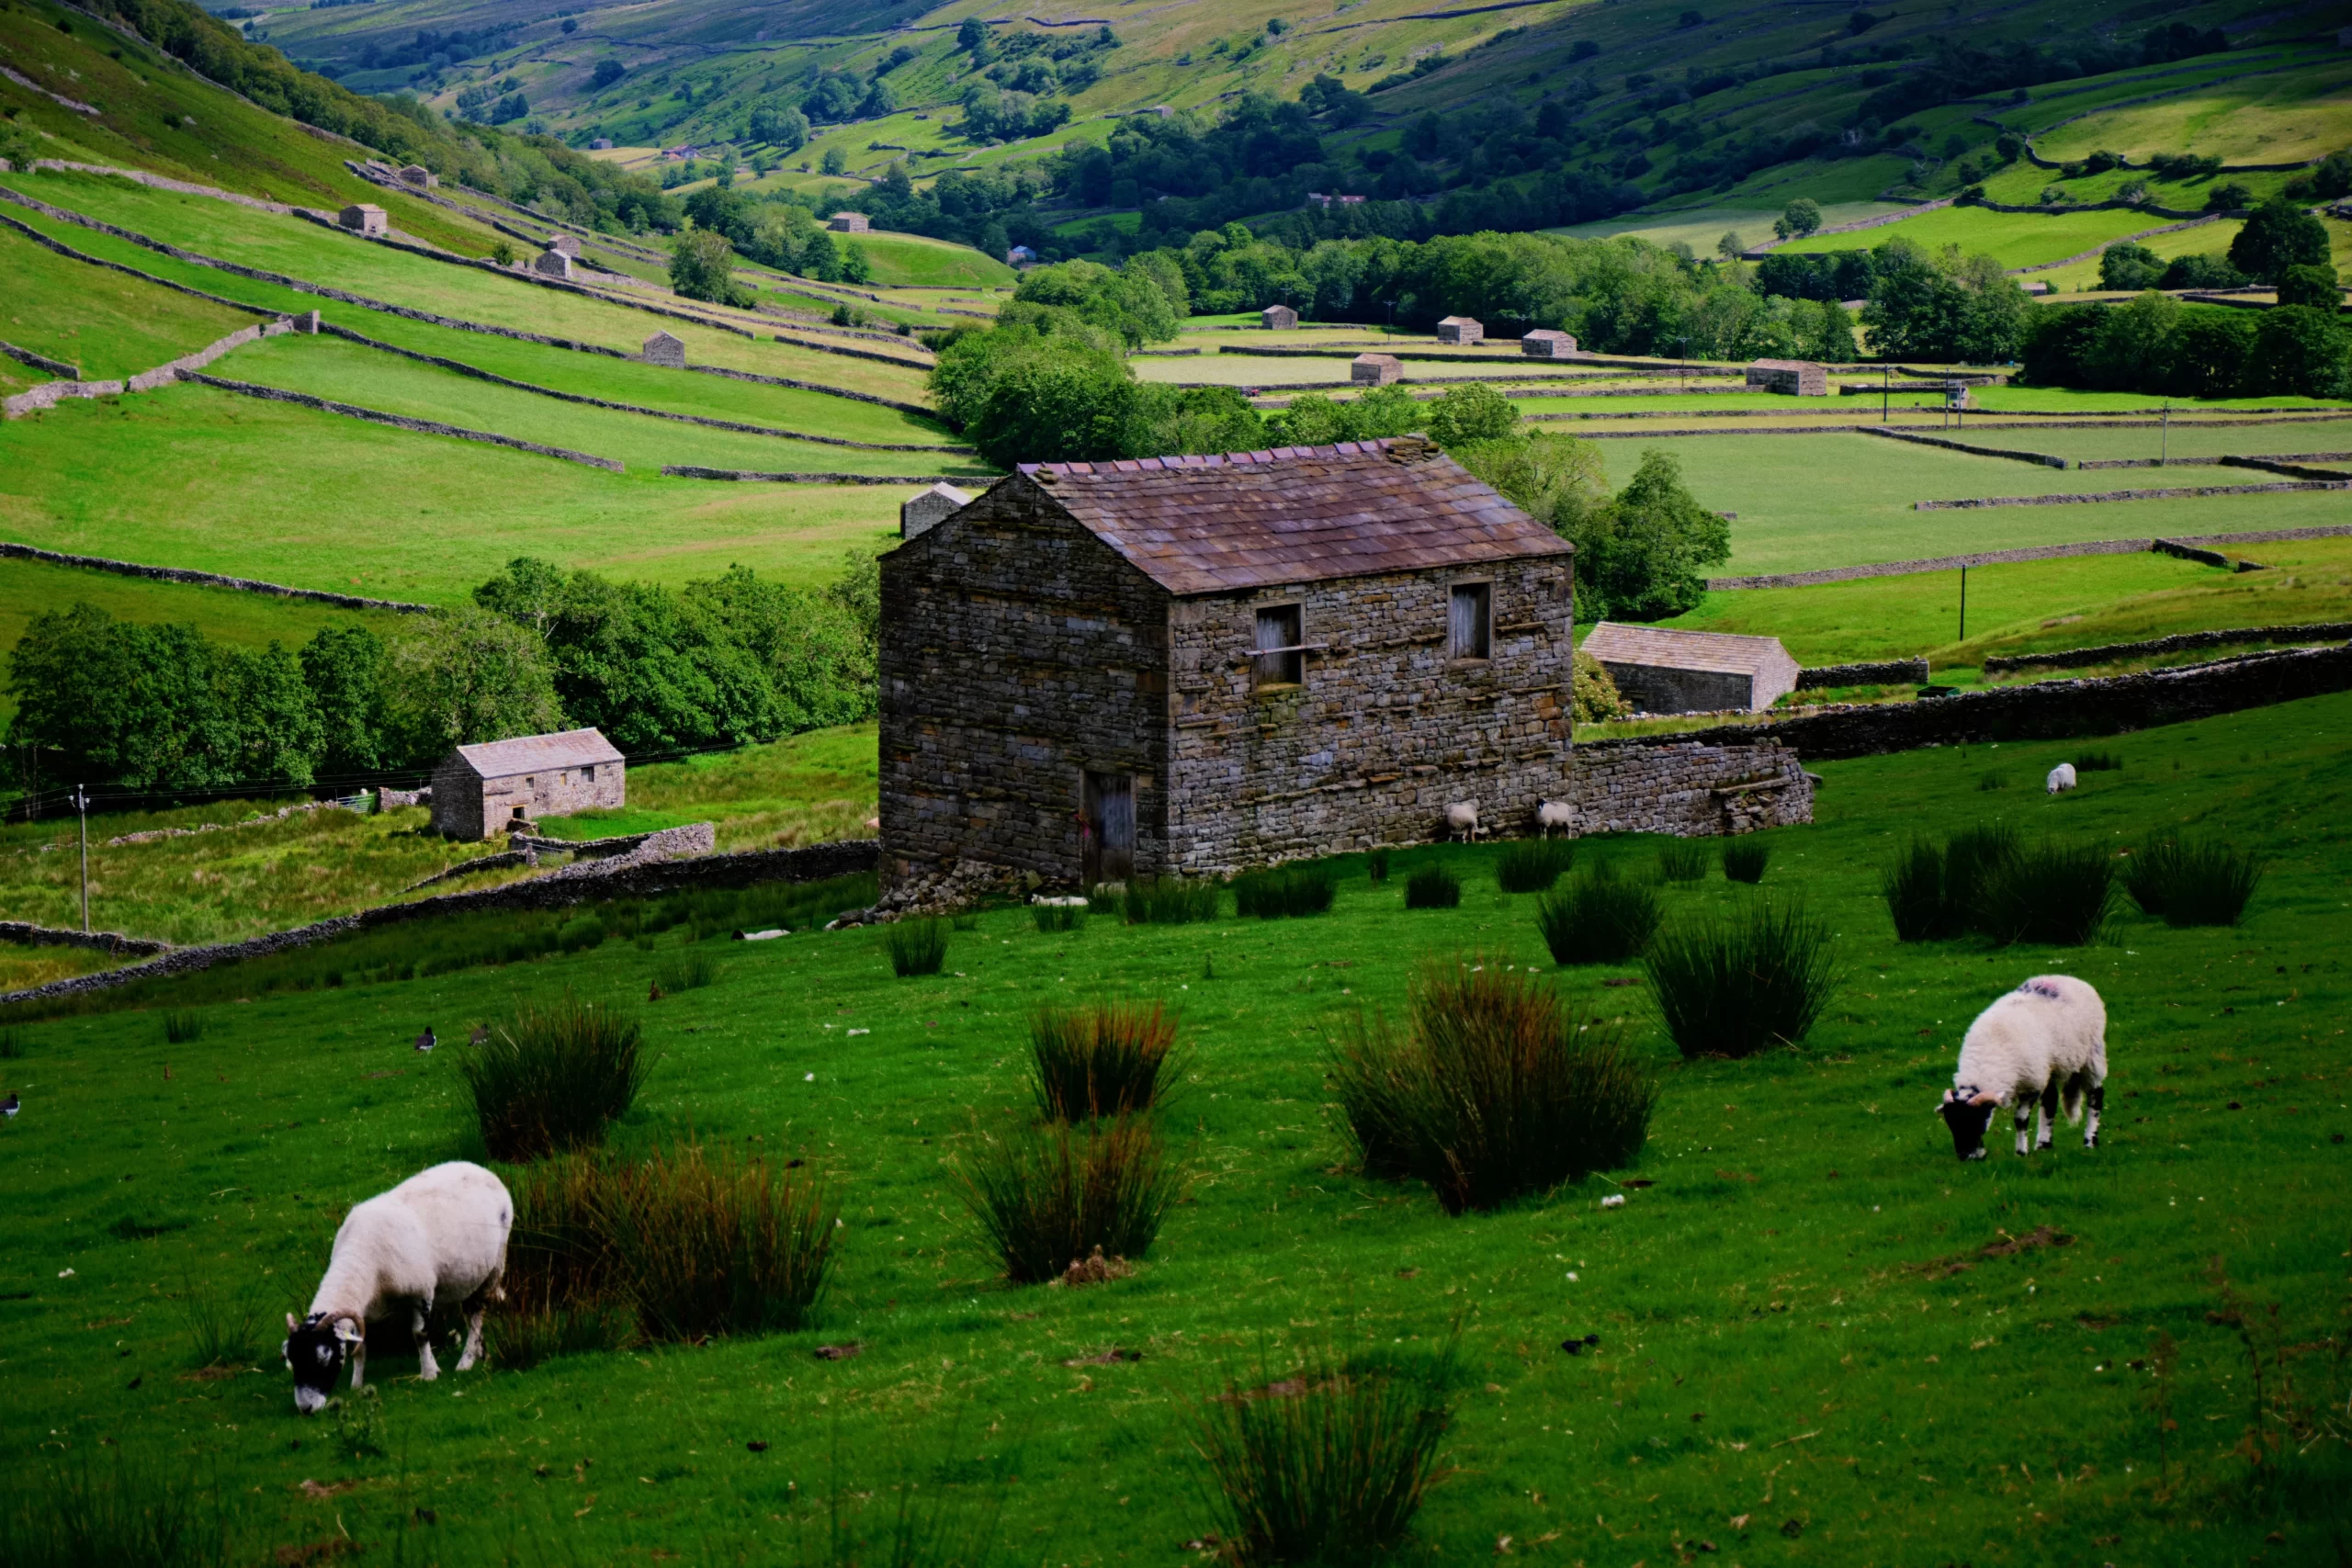 Keld, Richmond, UK Published on July 13, 2020 Free to use under the Unsplash License To my mind this is the quintessential Swaledale scene. Swaledale sheep grazing, grey barns as far as the eye can see, the curves of the valley, the fields neatly segmented by drystone walls, this scene has it all. Shot from Cloggerby Rigg near Thwaite.